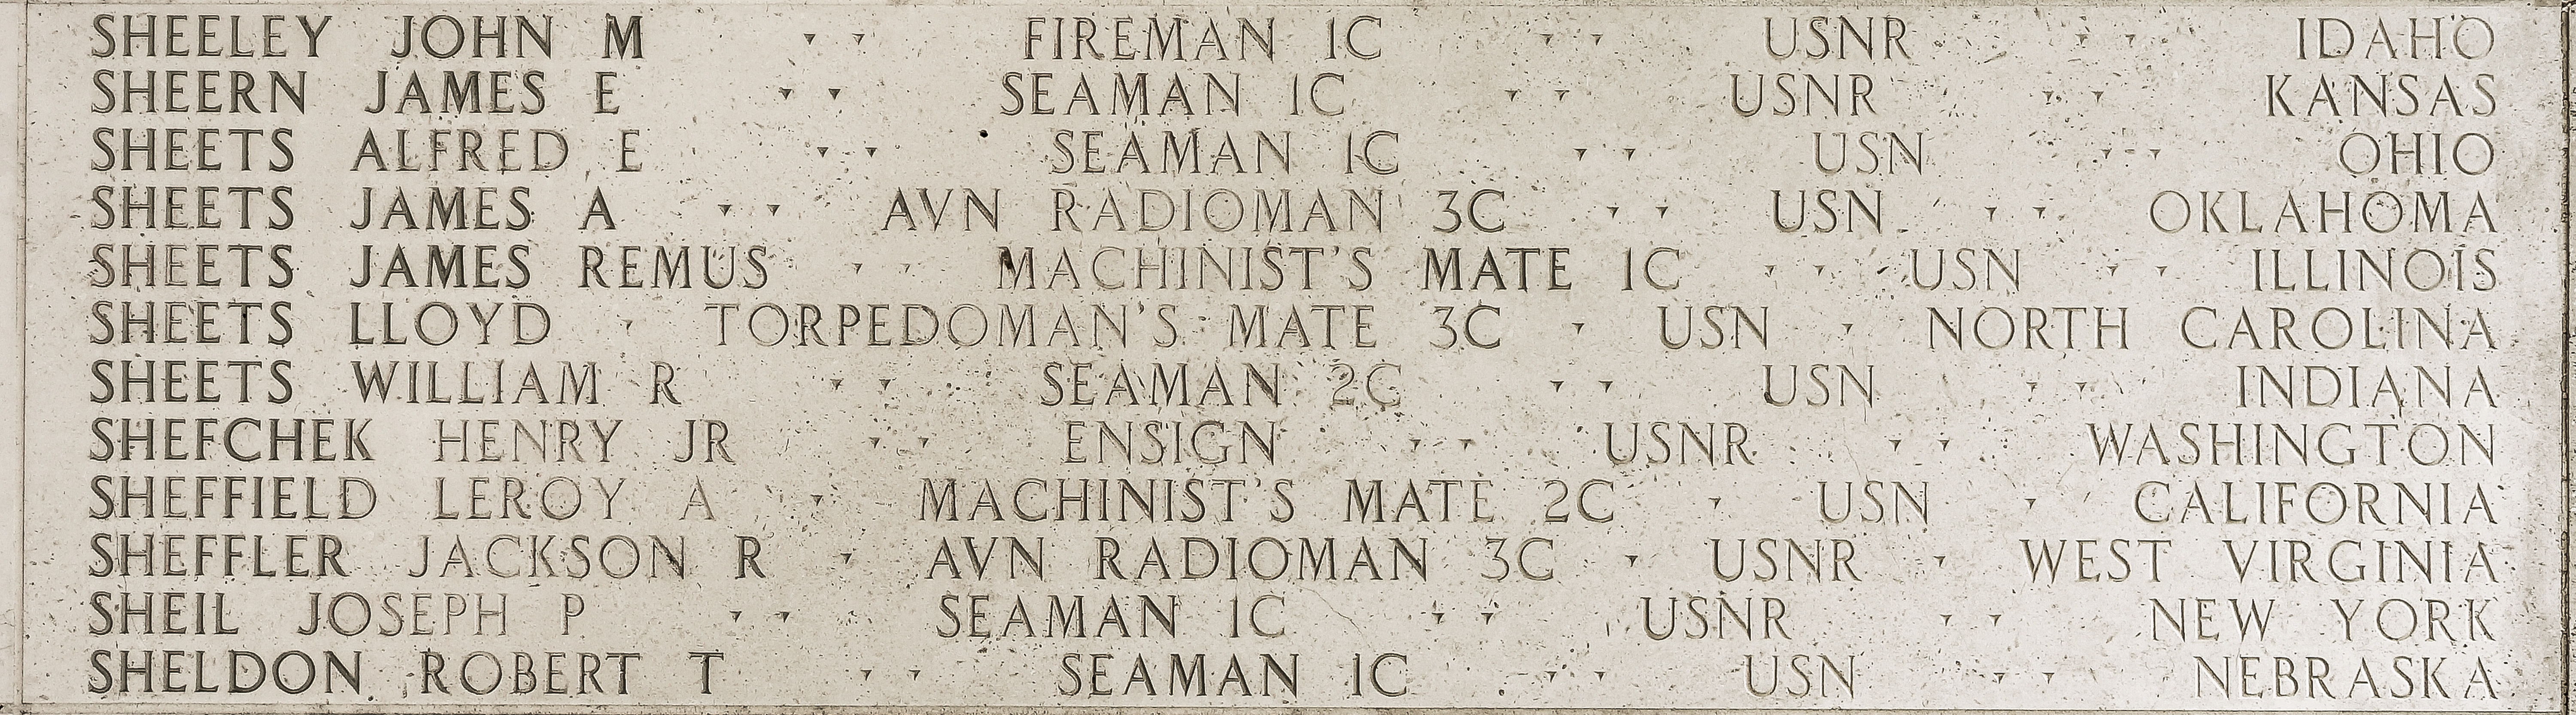 William R. Sheets, Seaman Second Class